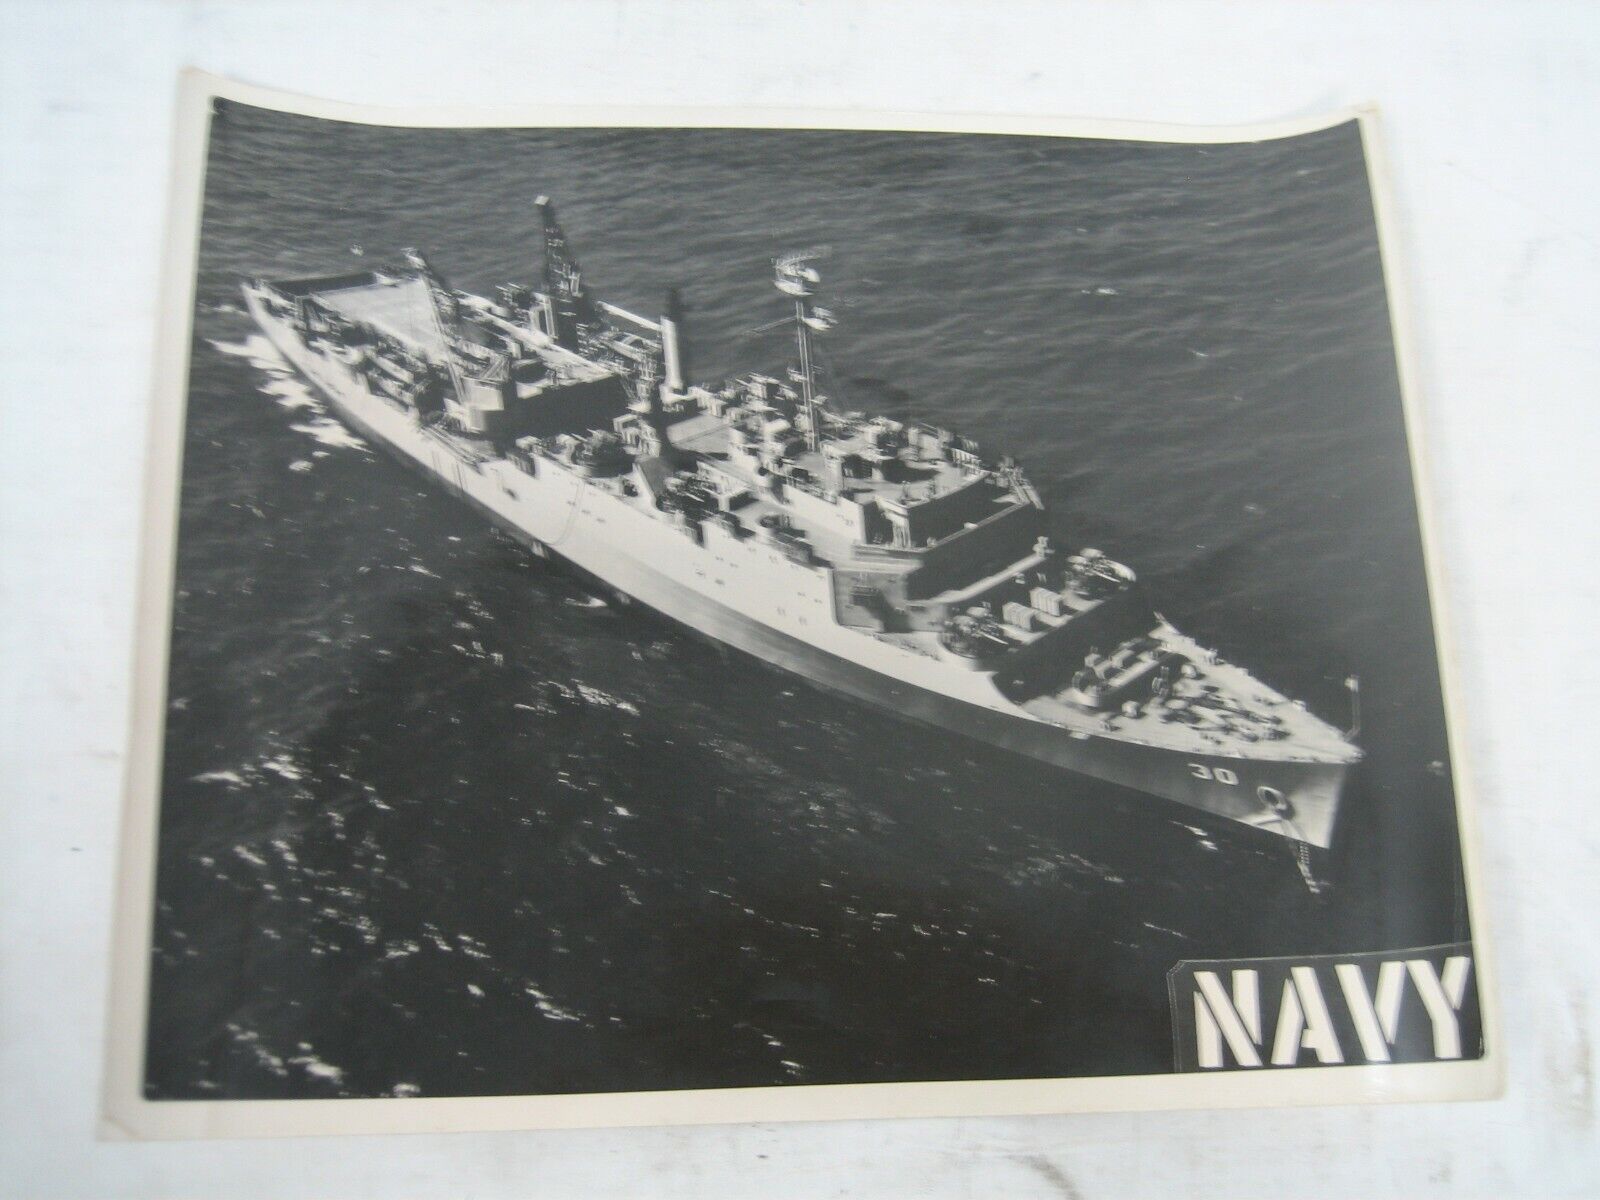 official navy USS fort snelling photo 10x8 lsd-30 1956 vtg picture thomaston